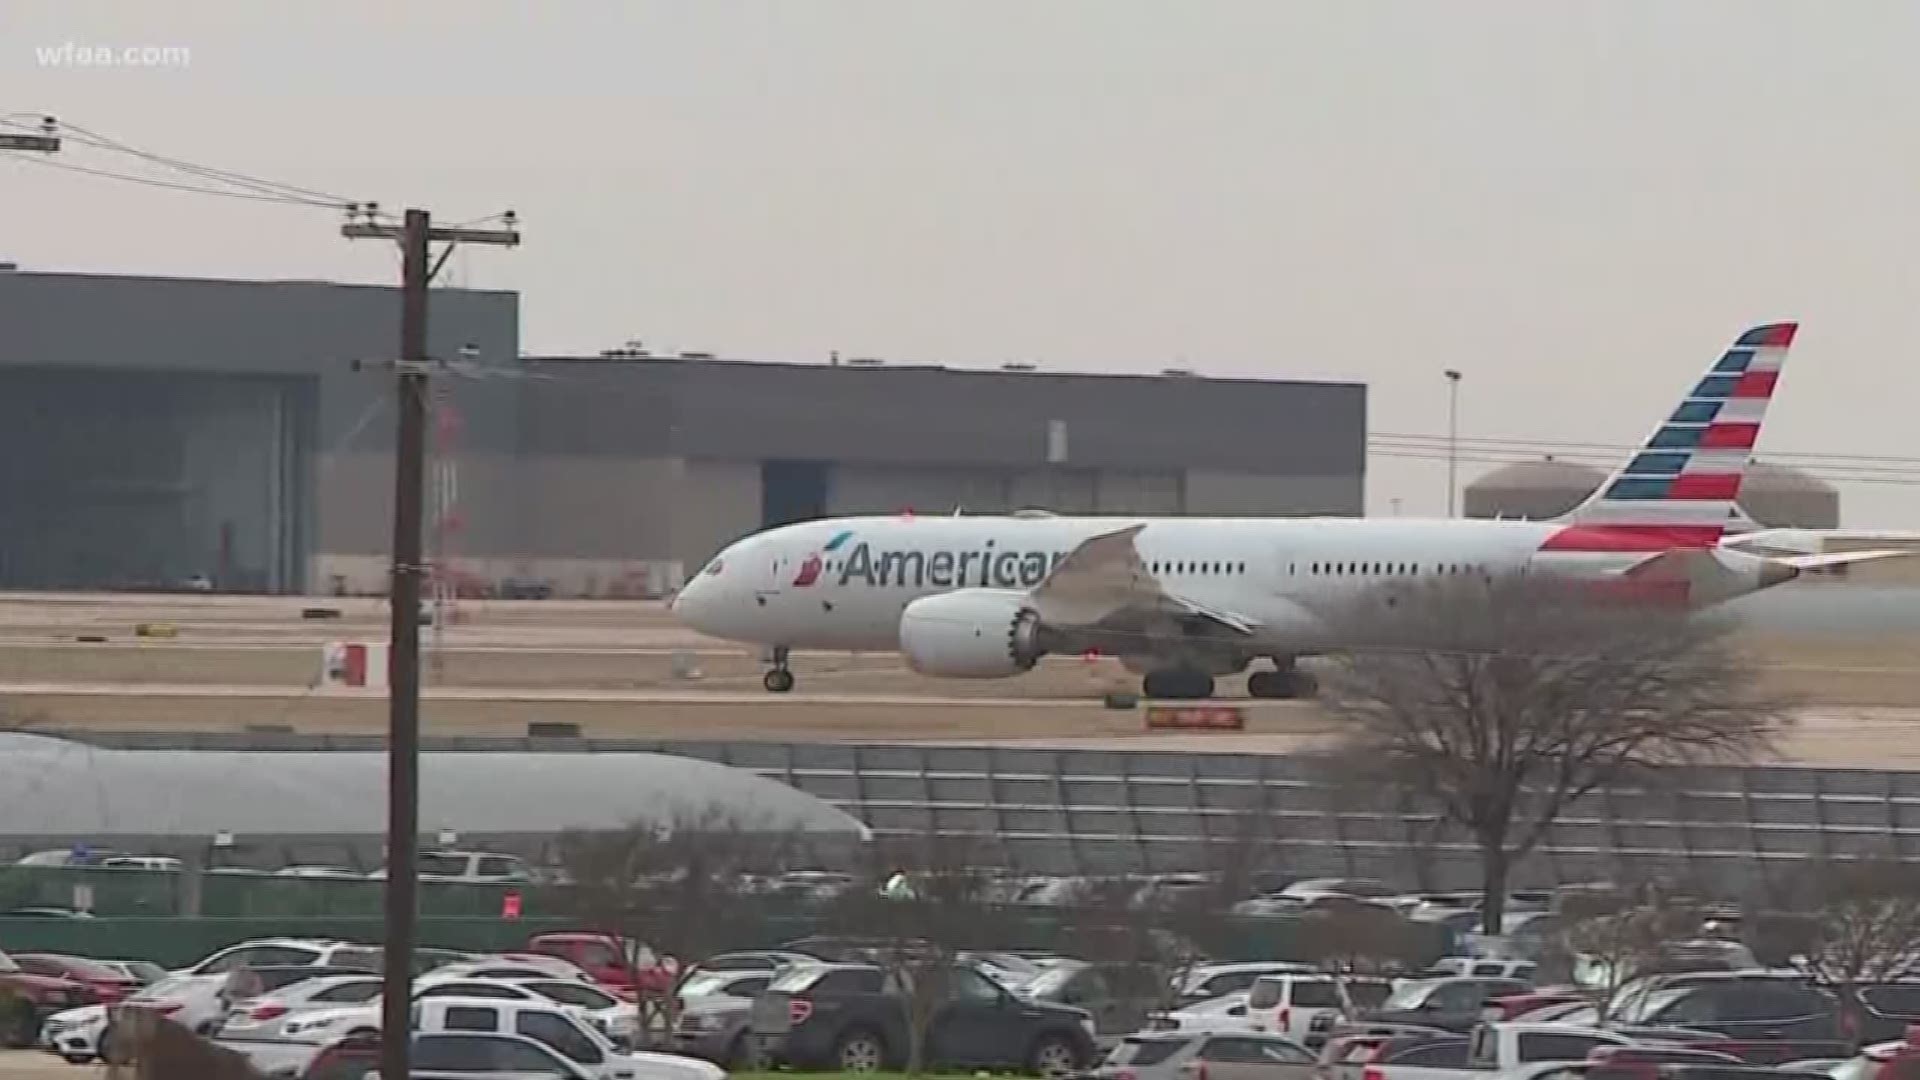 "Numerous" flights were cancelled or delayed at North Texas' two major airports after a ground stop resulting from smoke in an air traffic control building.